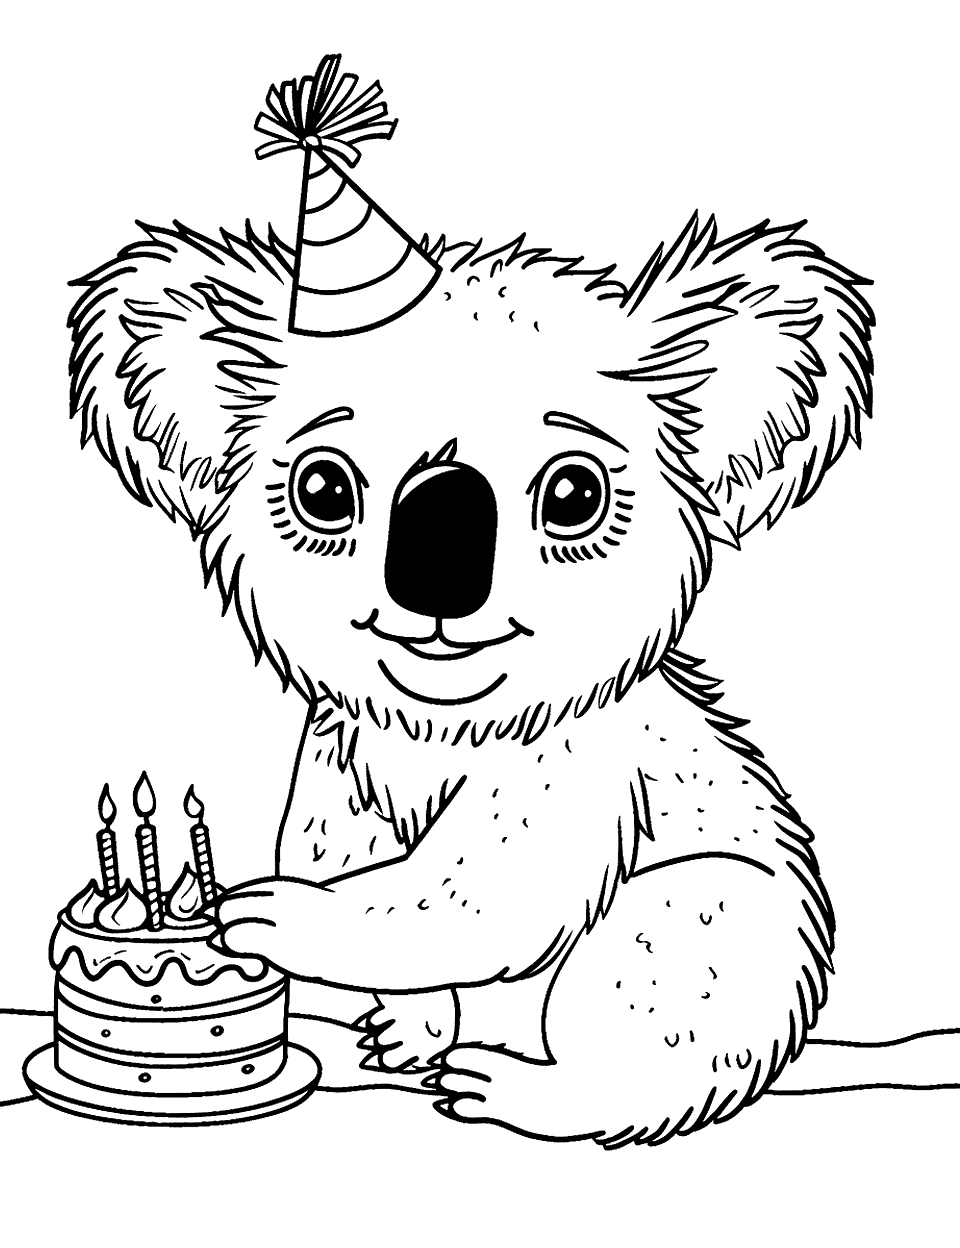 Koala in a Festive Mood Coloring Page - A koala with a party hat, sitting beside a small cake.